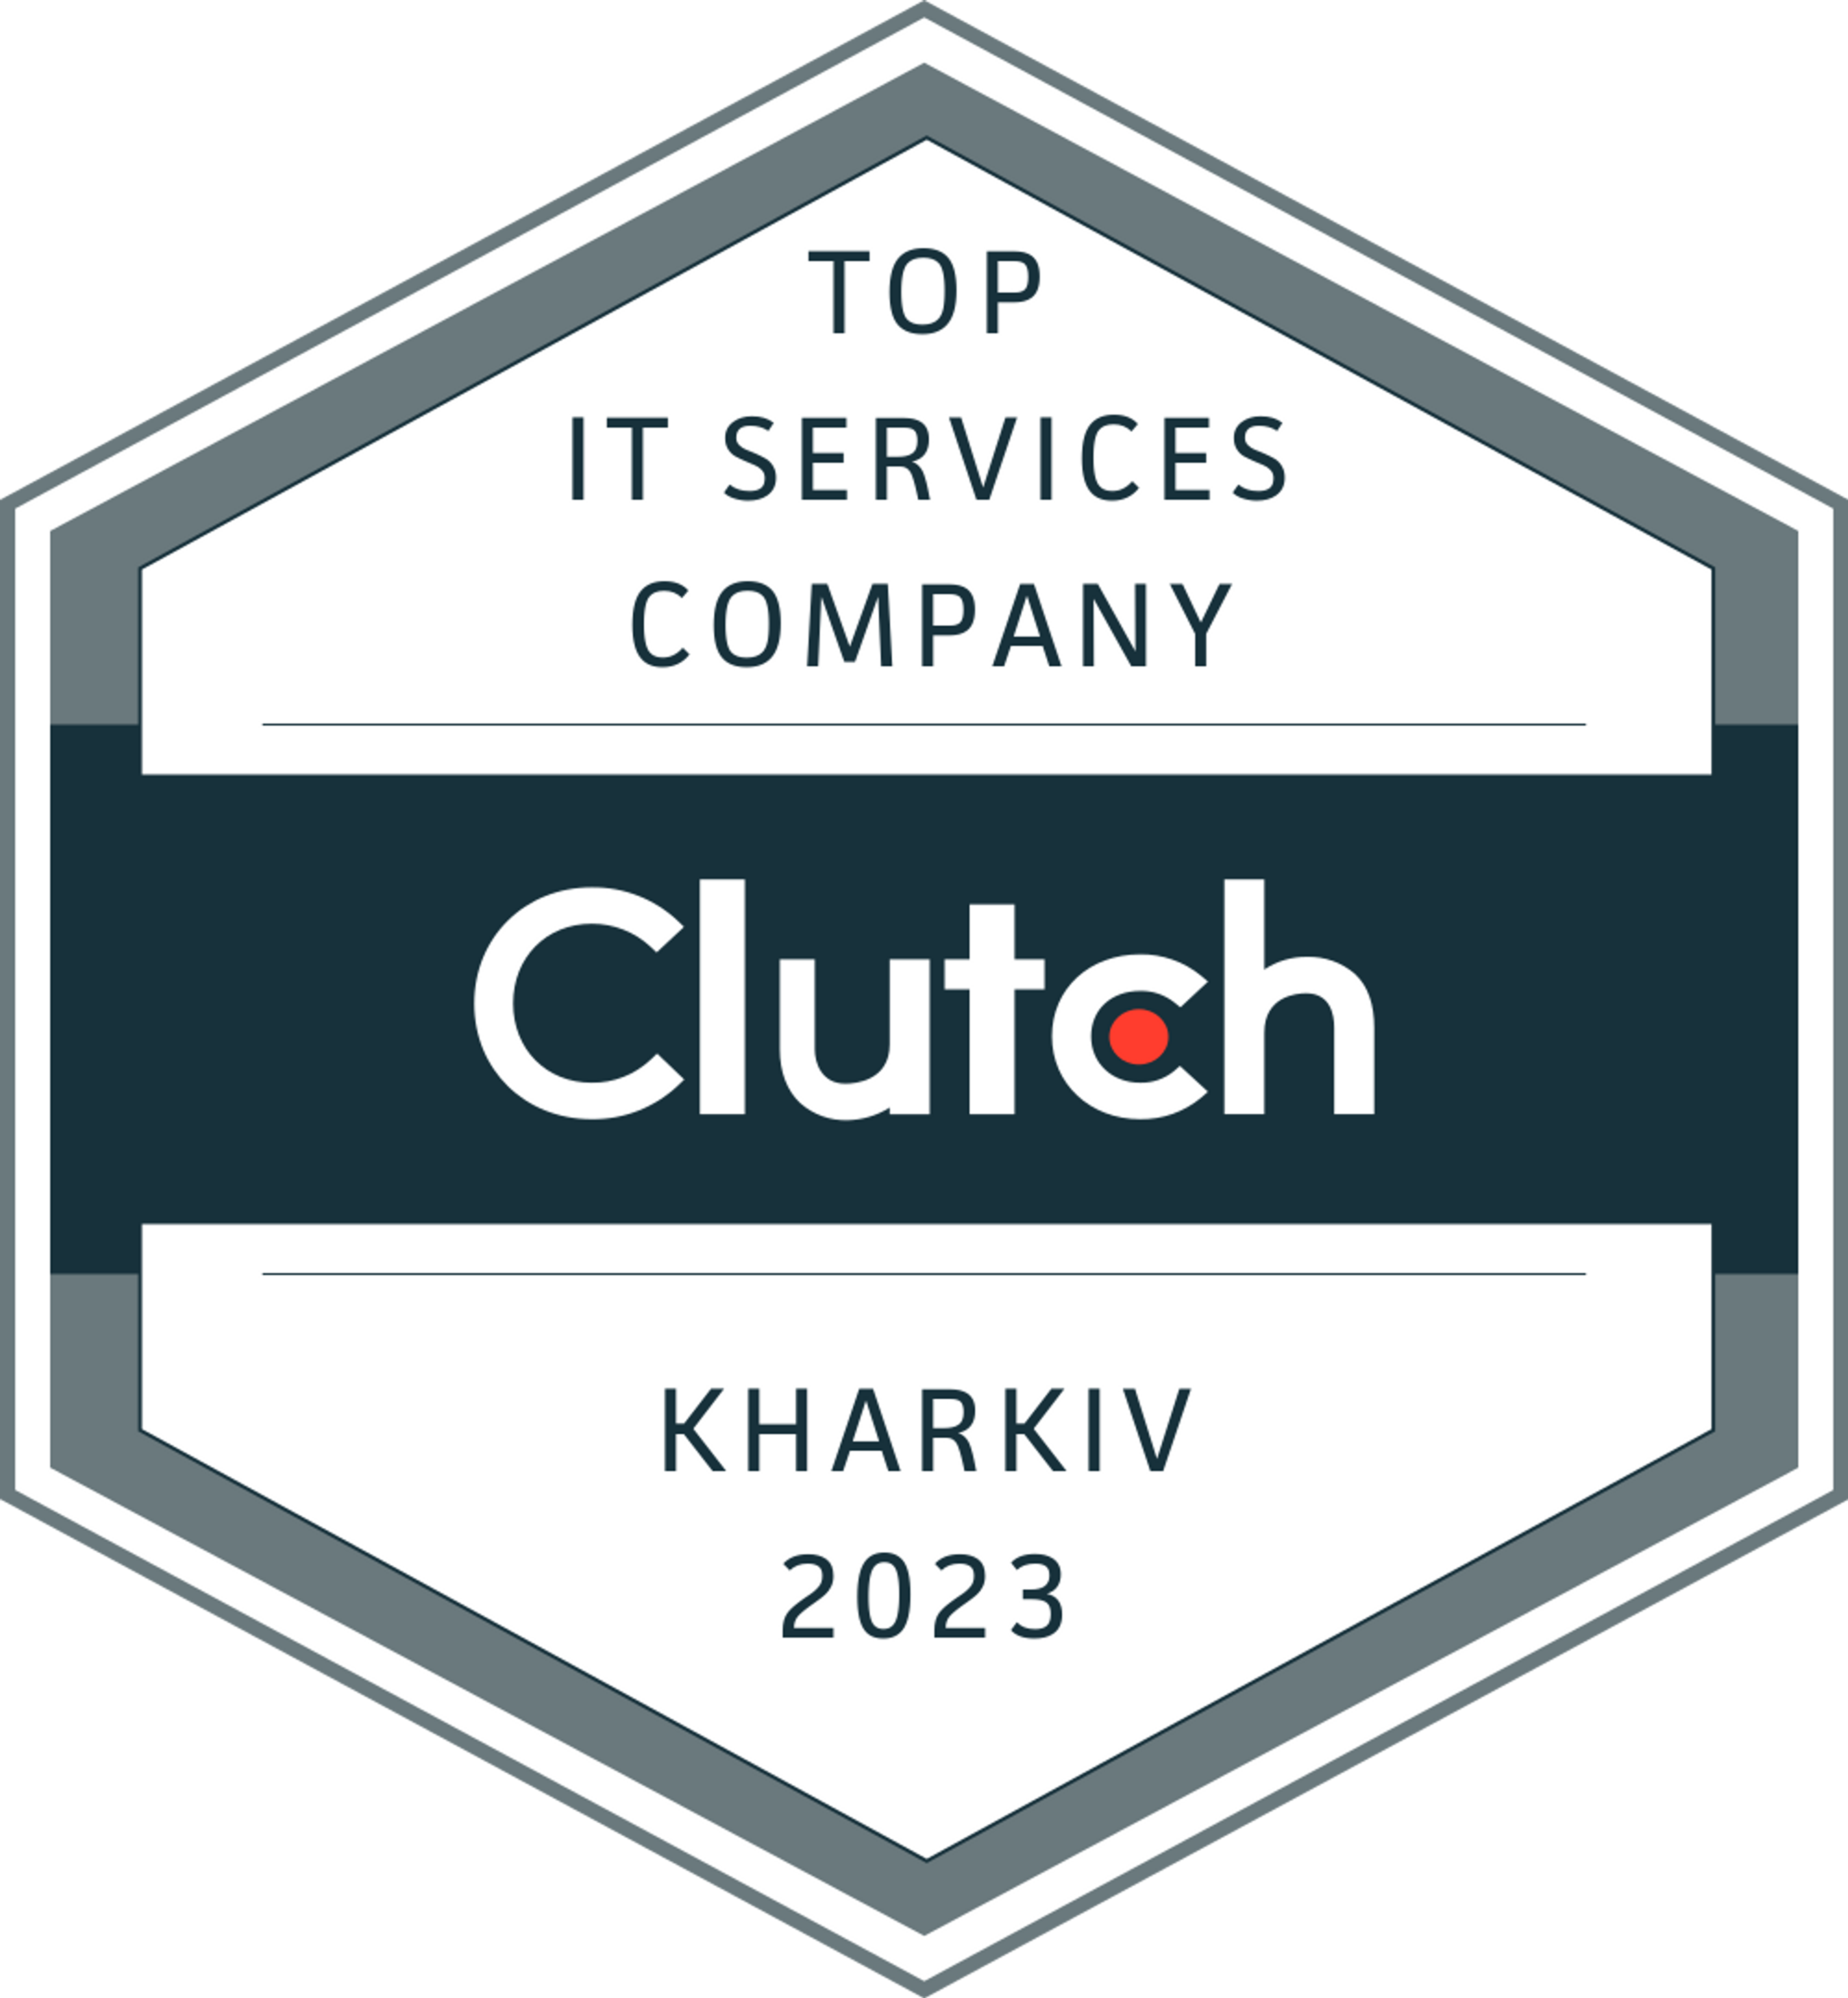 Top IT Services Company